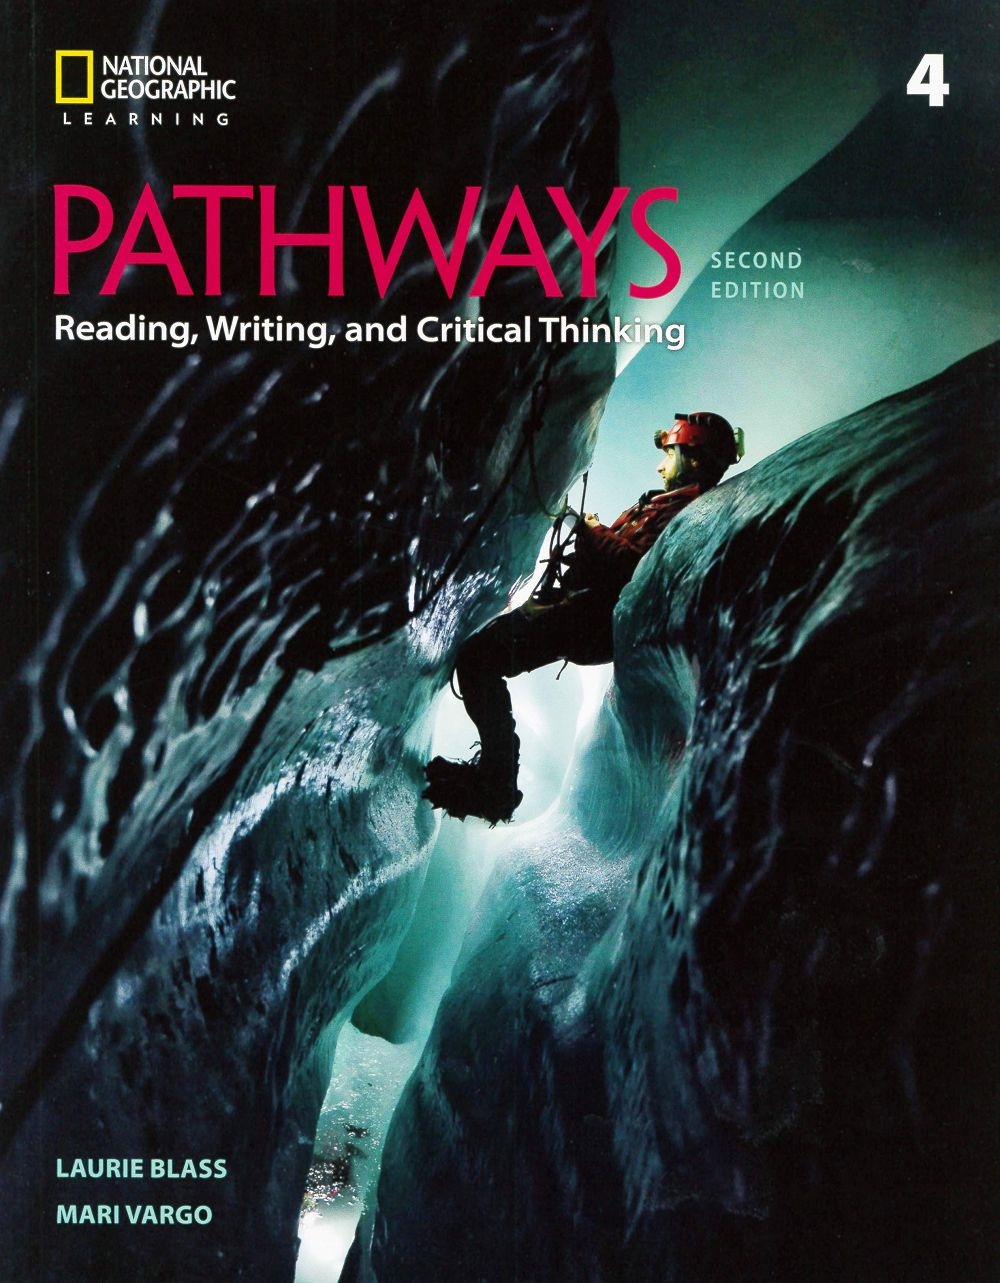 Pathways: Reading, Writing, and Critical Thinking (4) 2/e